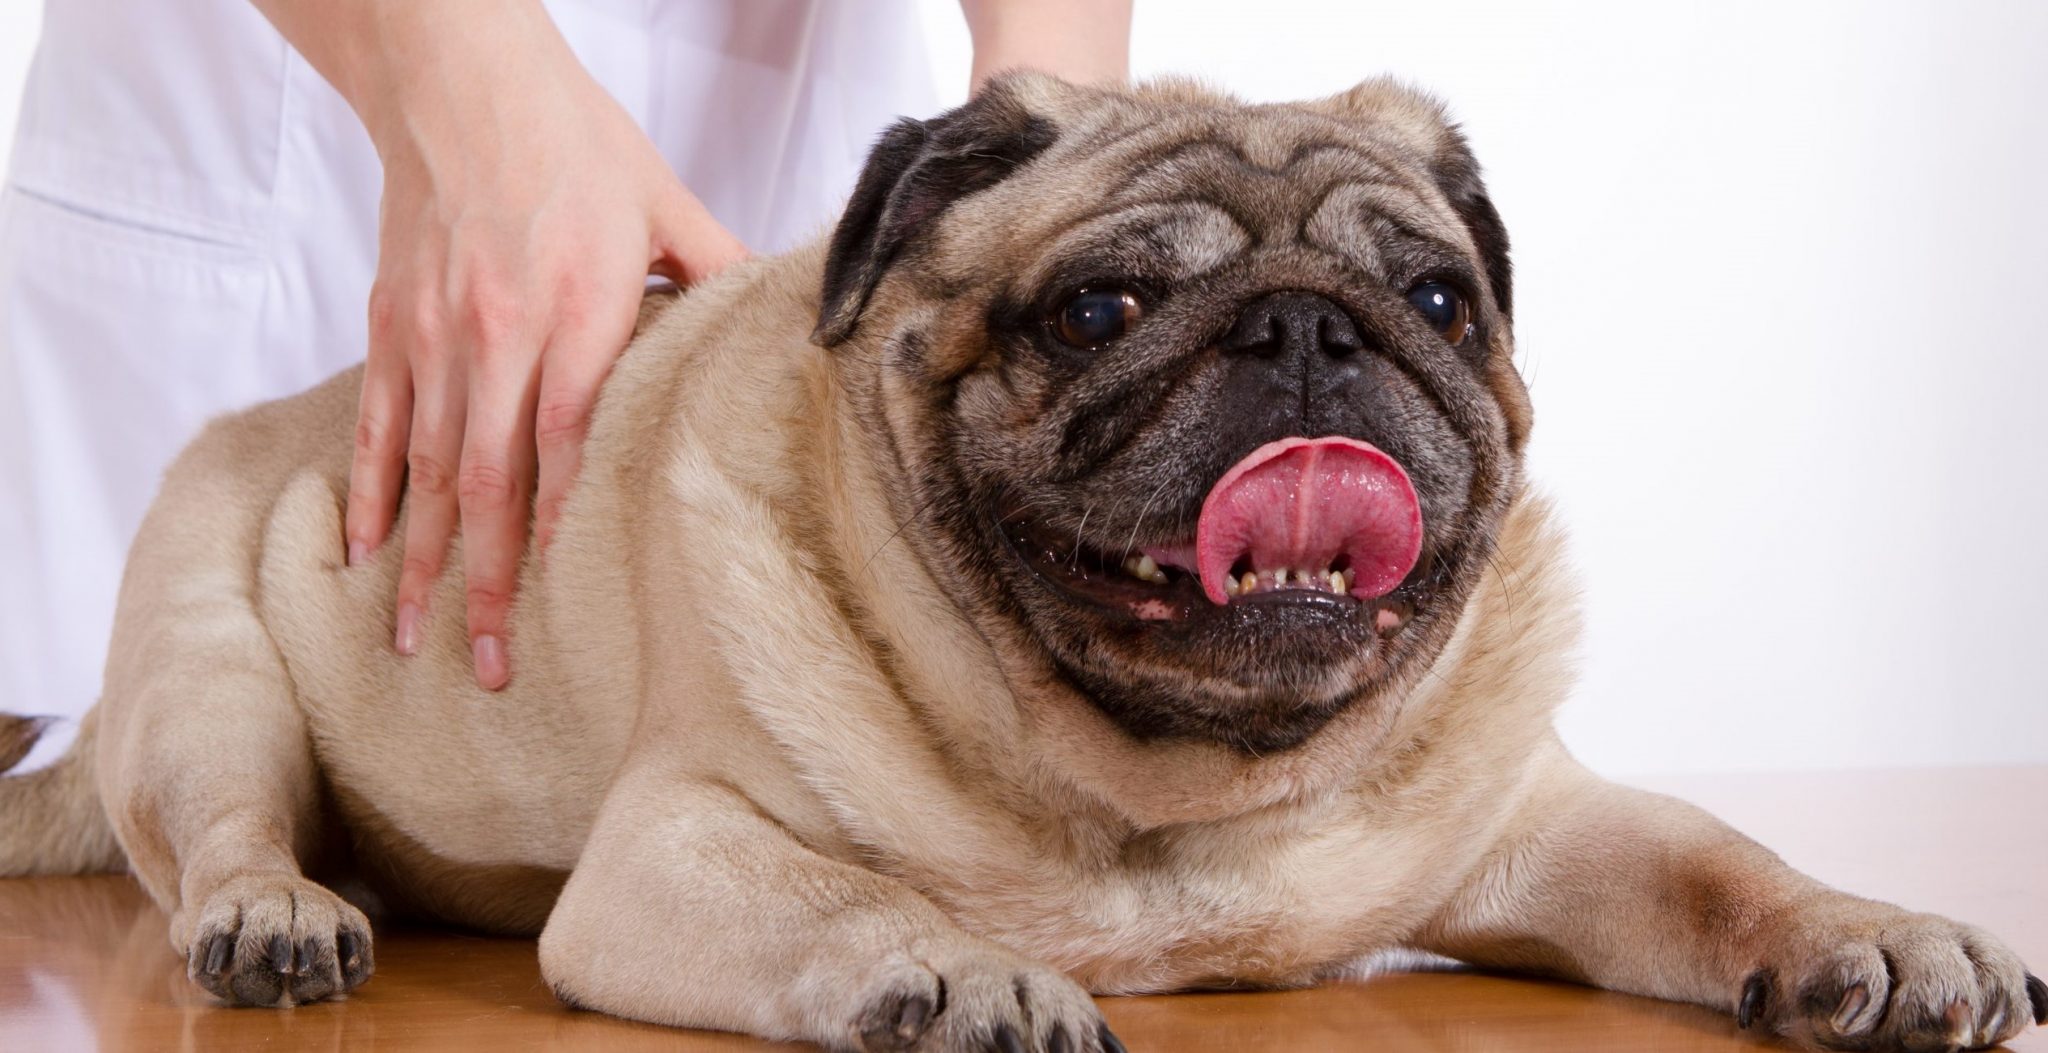 Pug Weight: Help Your Pug Get To A Healthy Pug Weight